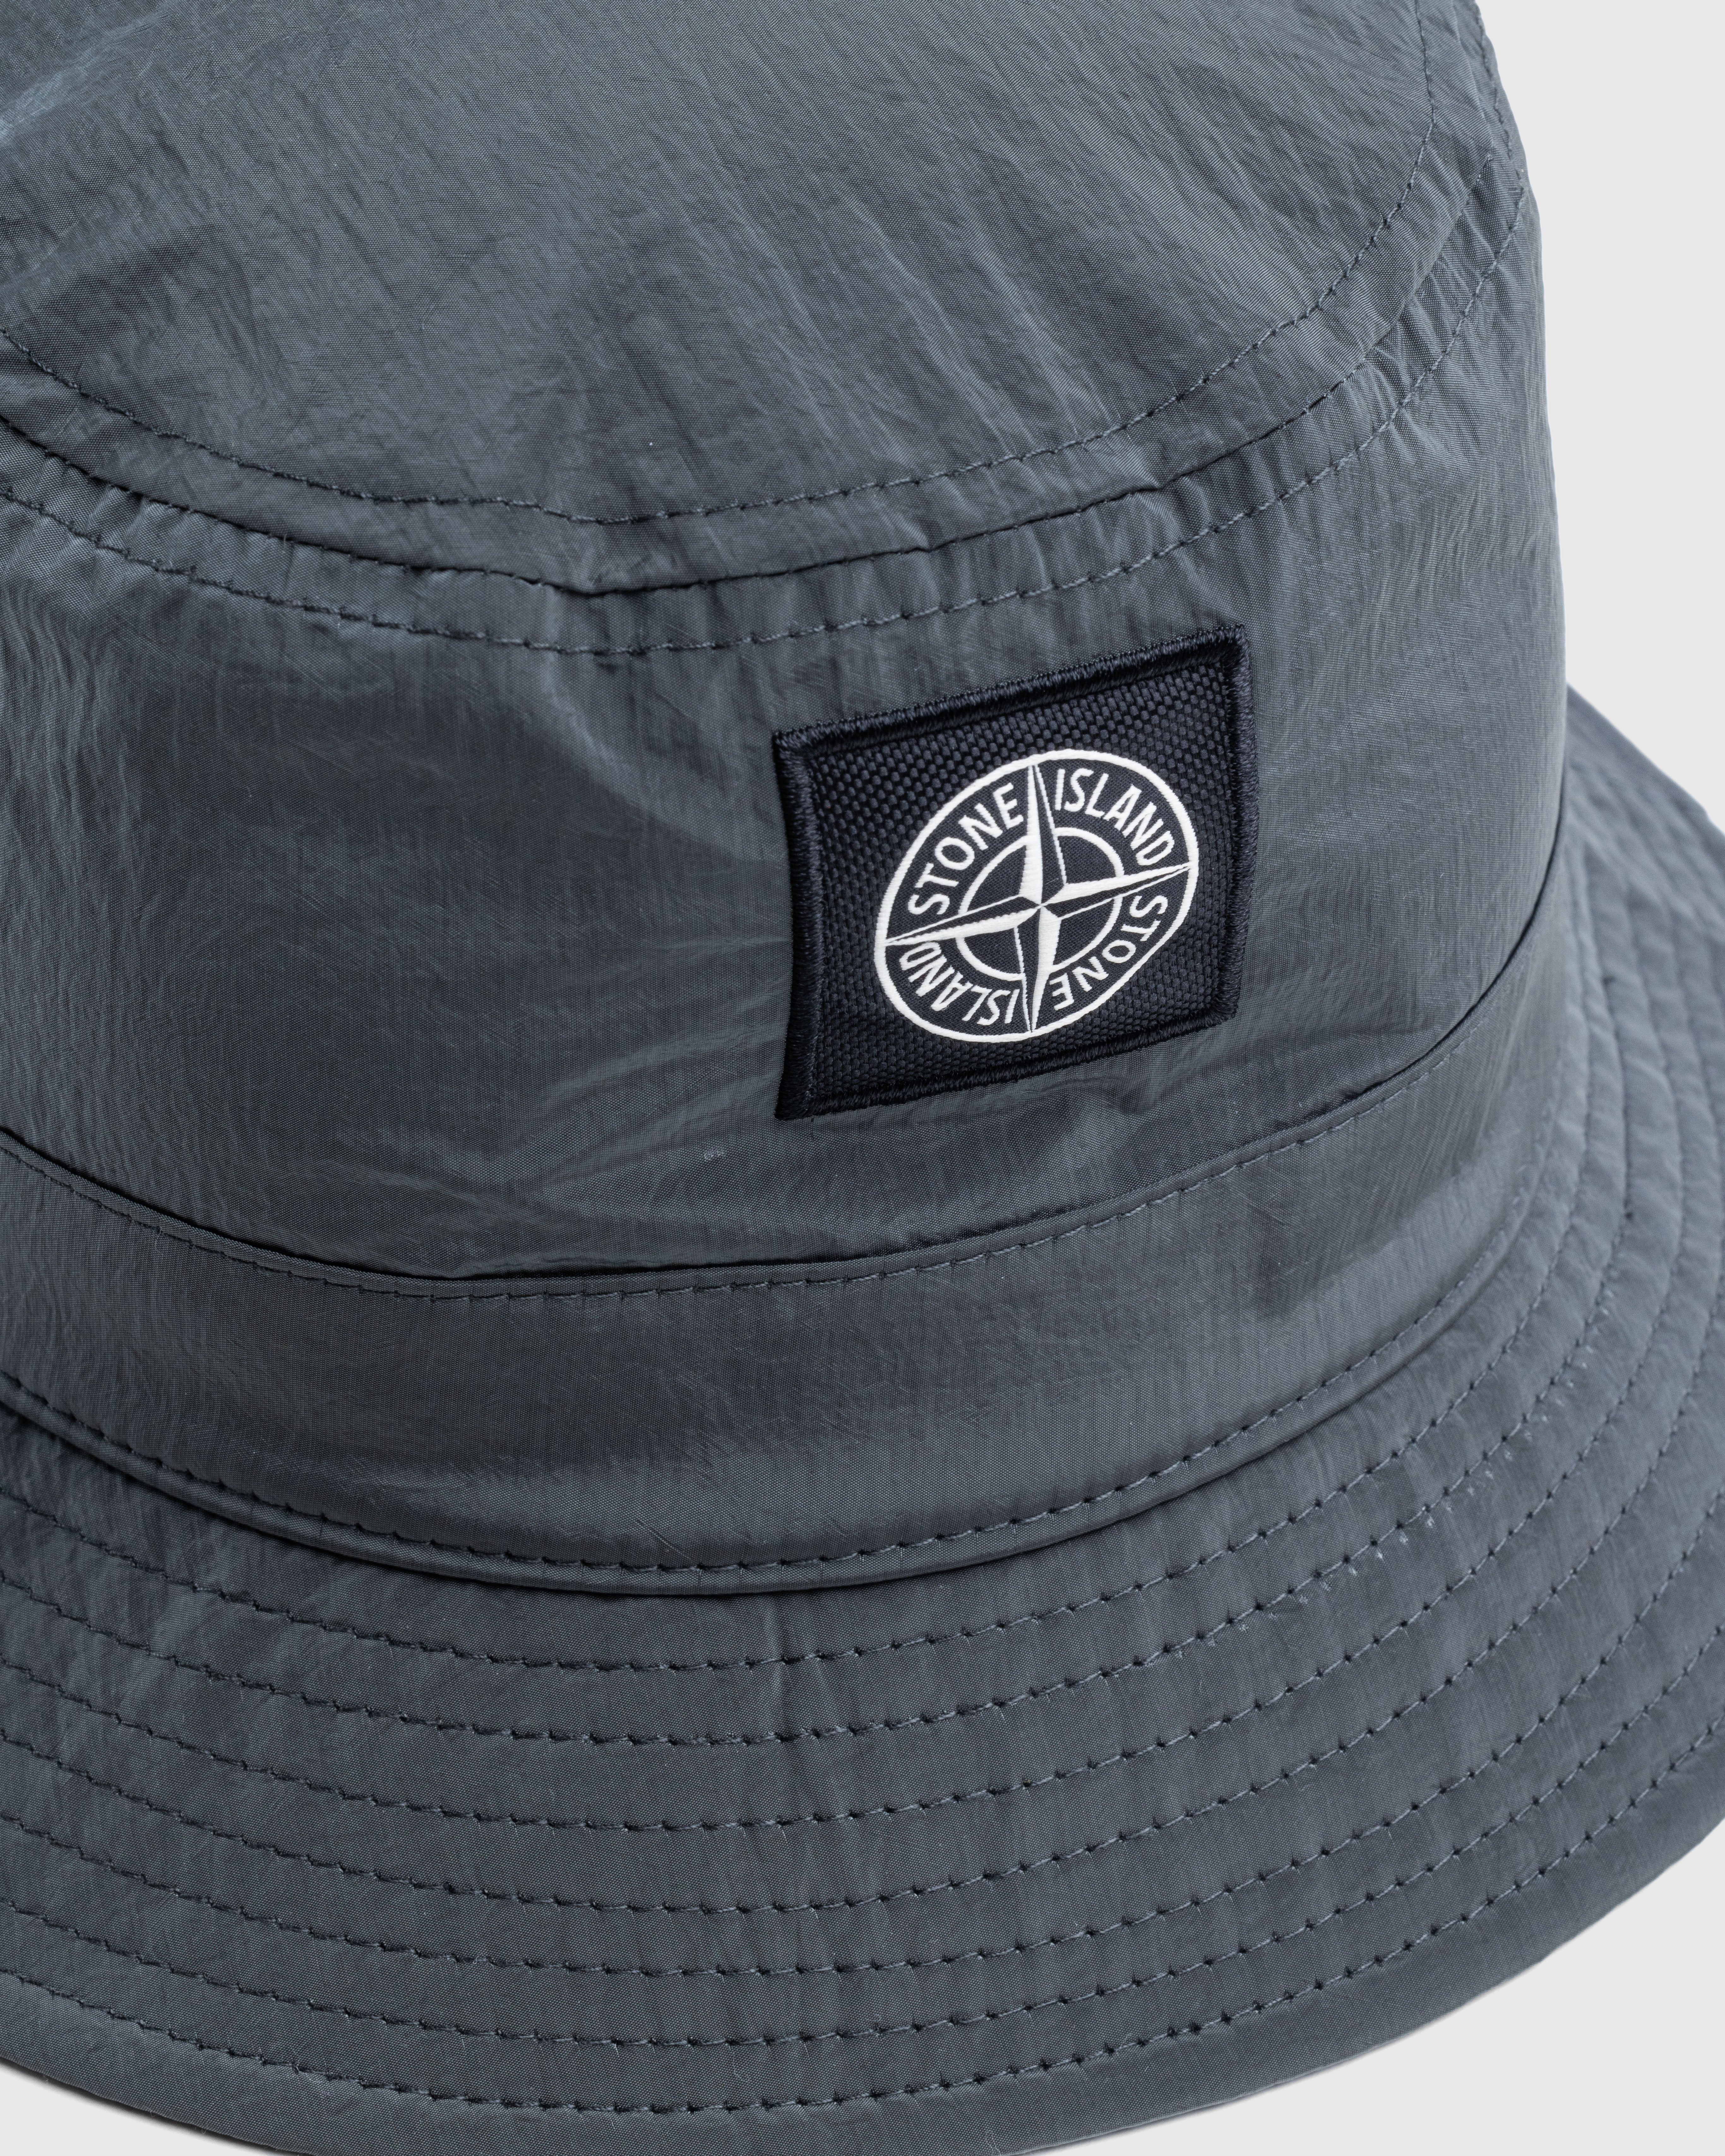 Stone Island - HAT MUSK - Accessories - Green - Image 4